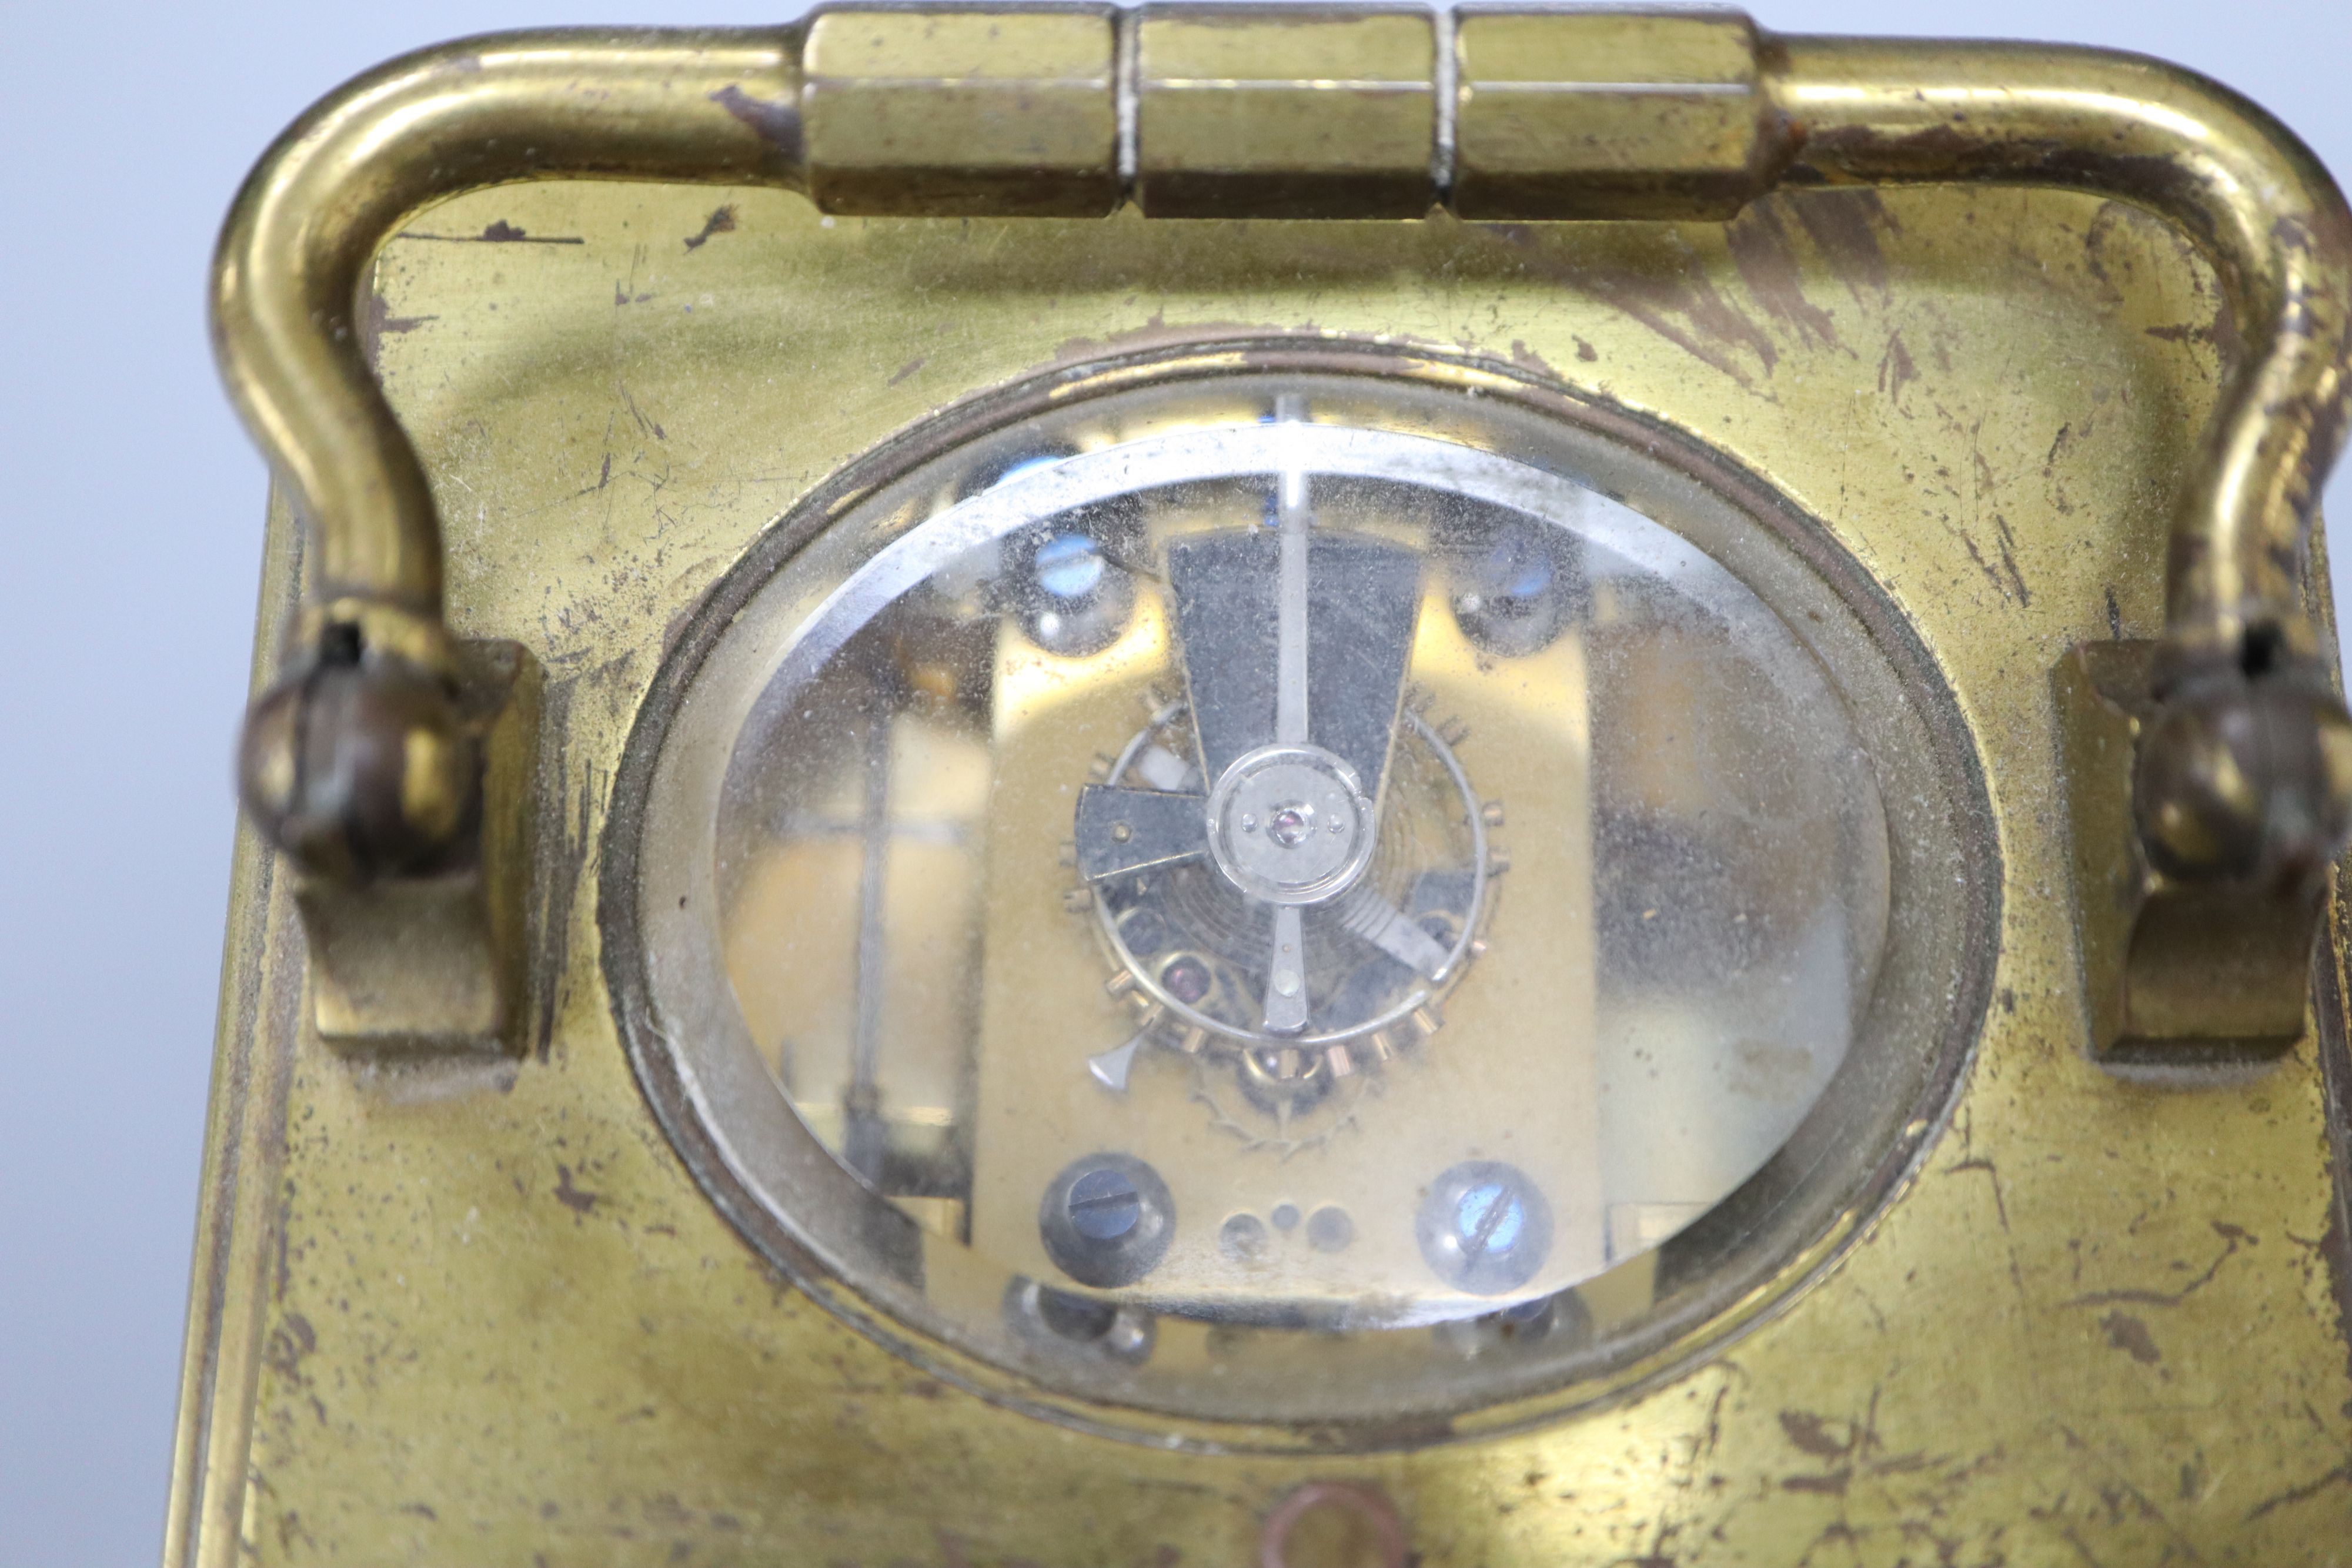 An hour repeating brass carriage clock,14cm